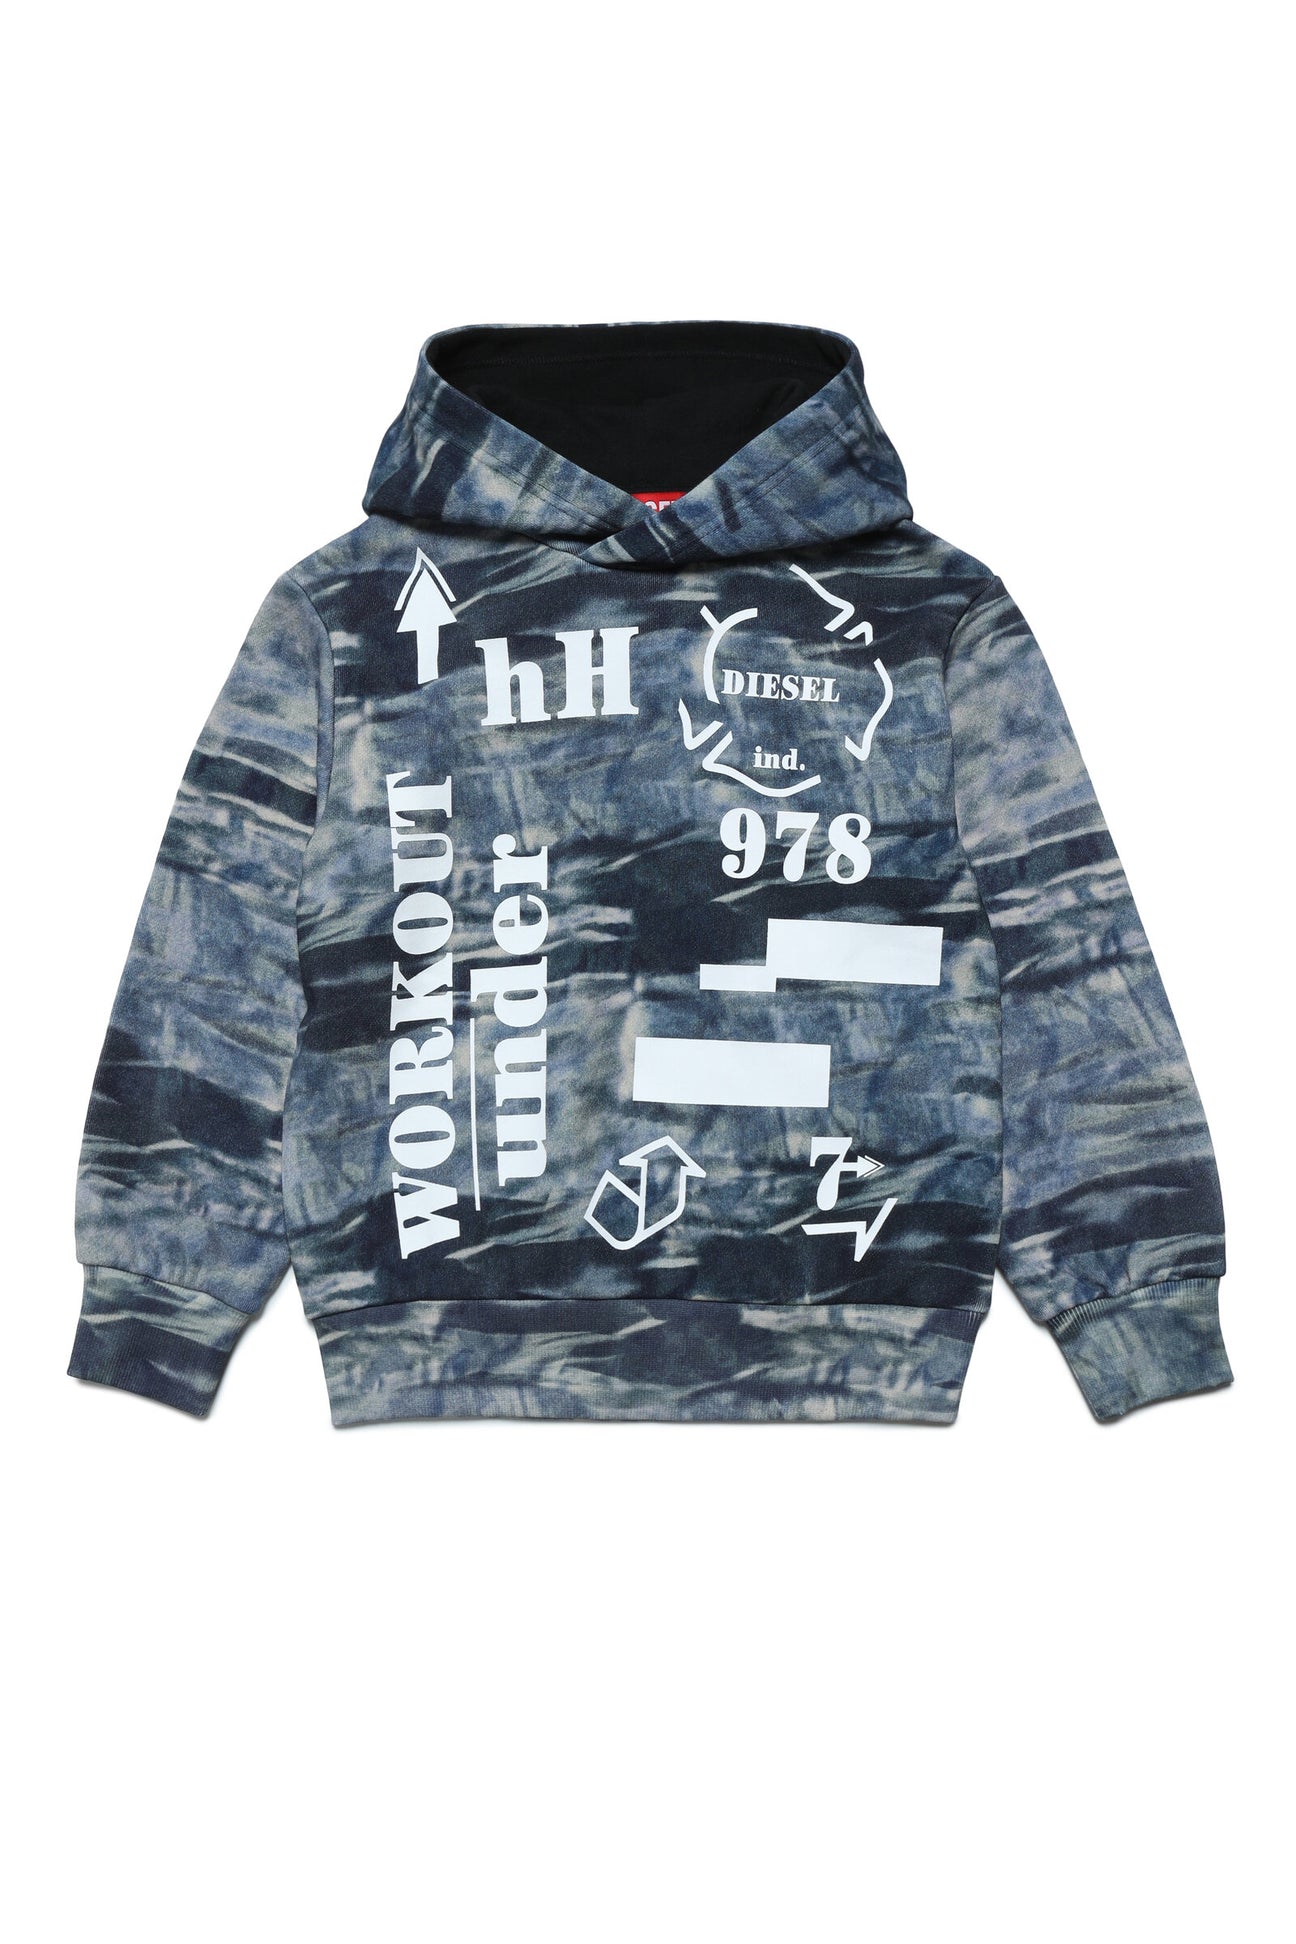 Hooded cotton sweatshirt with allover camouflage pattern and lettering 